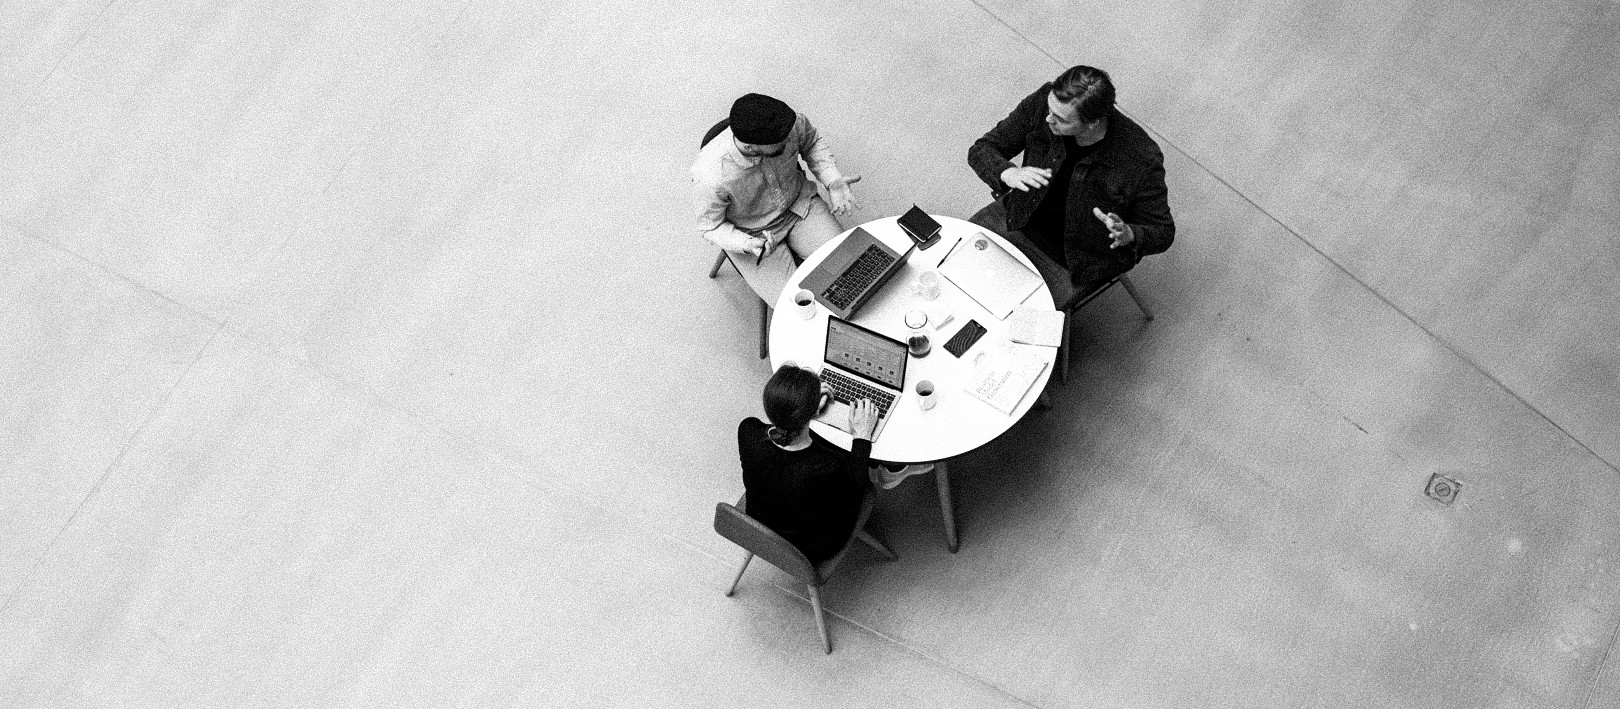 3 people having a meeting in the middle of a large room